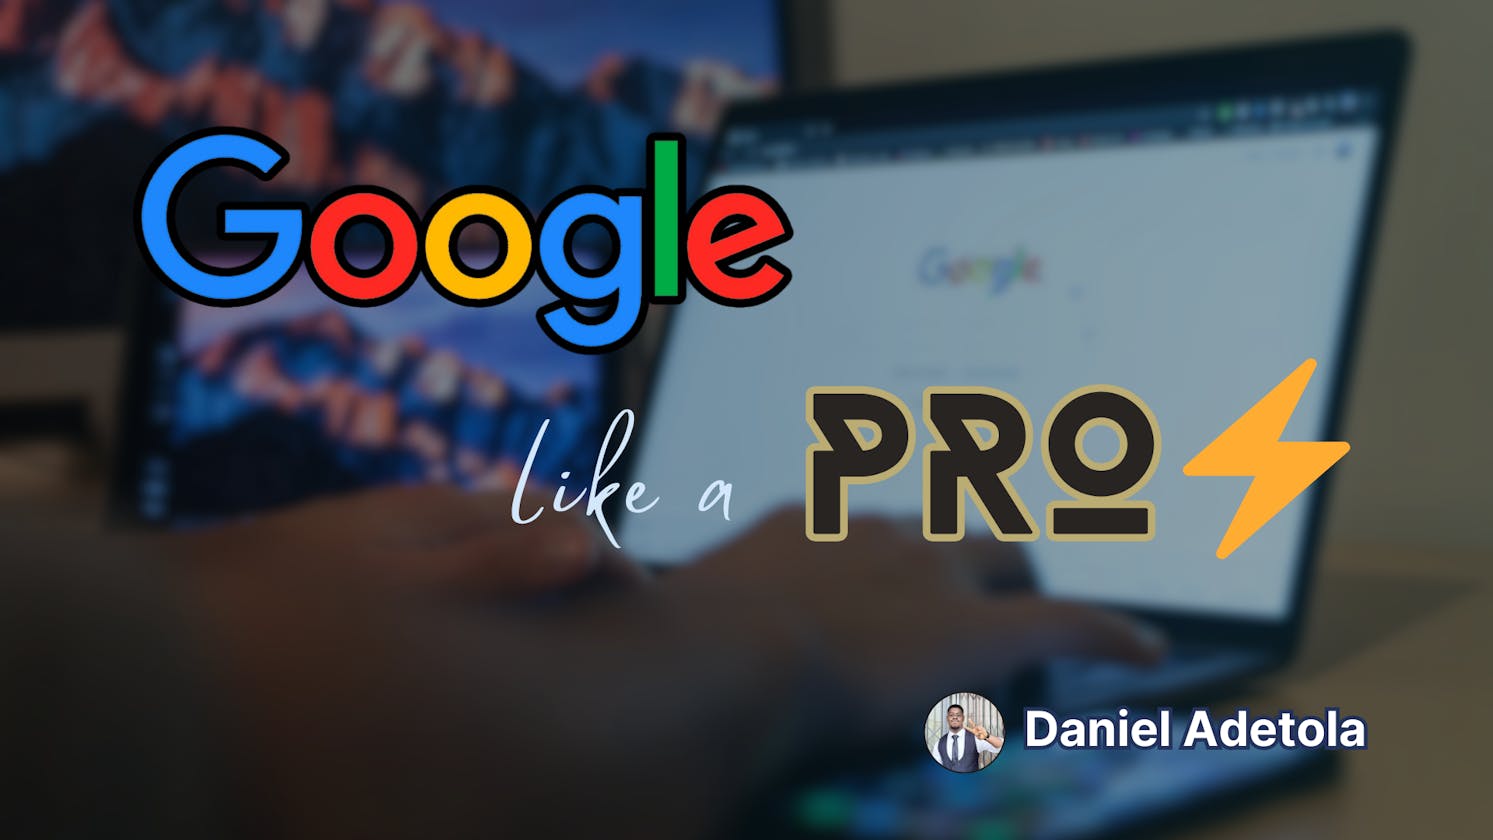 Google like a PRO! - A guide to productive Googling